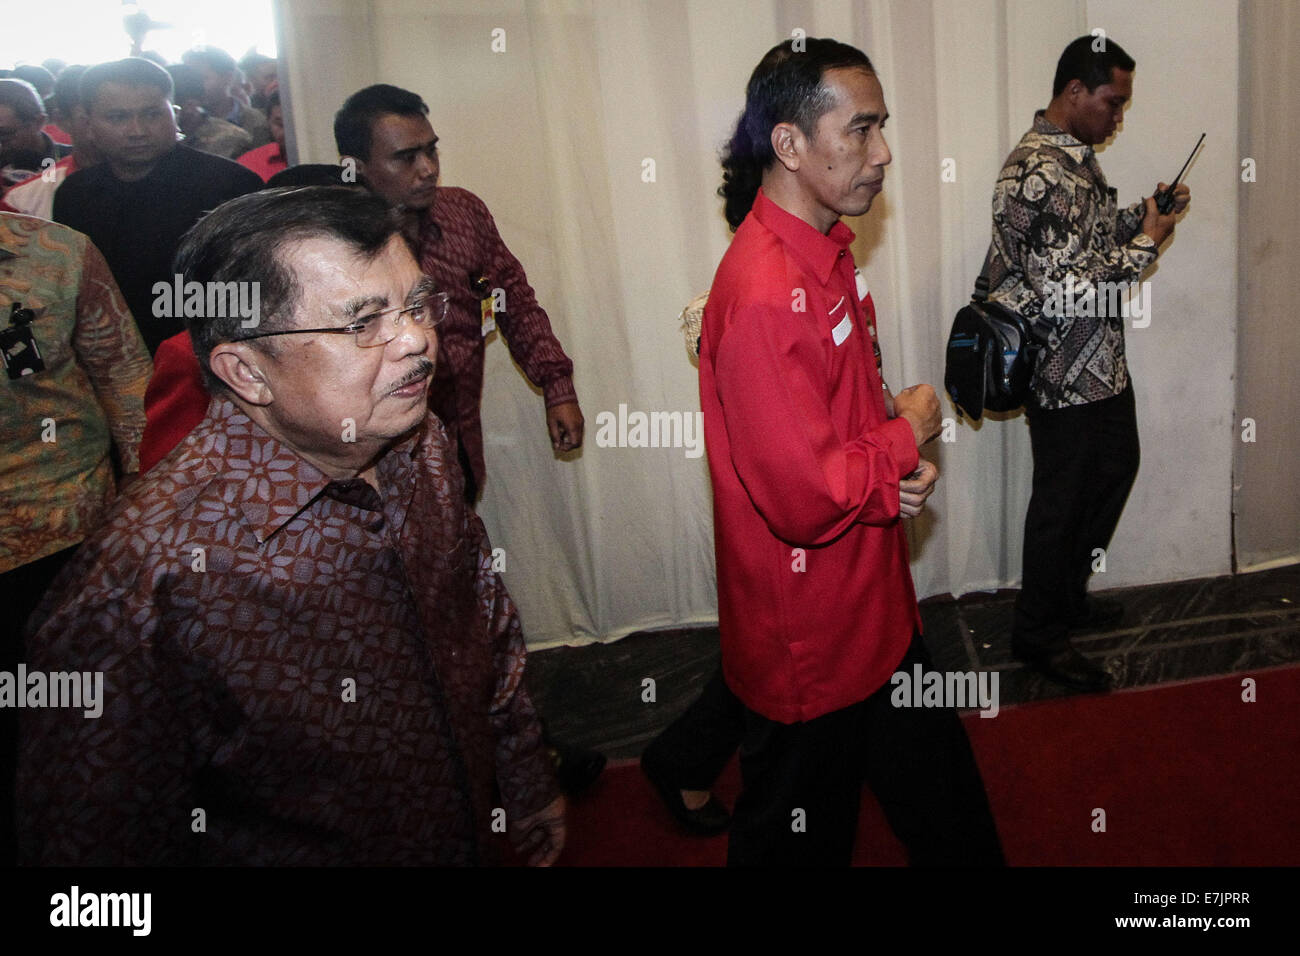 Semarang, Indonesia. 19th September, 2014. Indonesian president-elect Joko Widodo and Vice president-elect Jusuf Kalla (L) attend attend the 4th national working meeting of PDI-P at Marina Convention Hall in Semarang, Central Java, Indonesia. The national meeting attended by 1,590 party cadres from all over Indonesia and take place from 19-21 September 2014. The meeting is expected to change the 10-year mindset of the PDI-P, as it has switched to being the ruling party from being the opposition party. Credit:  PACIFIC PRESS/Alamy Live News Stock Photo